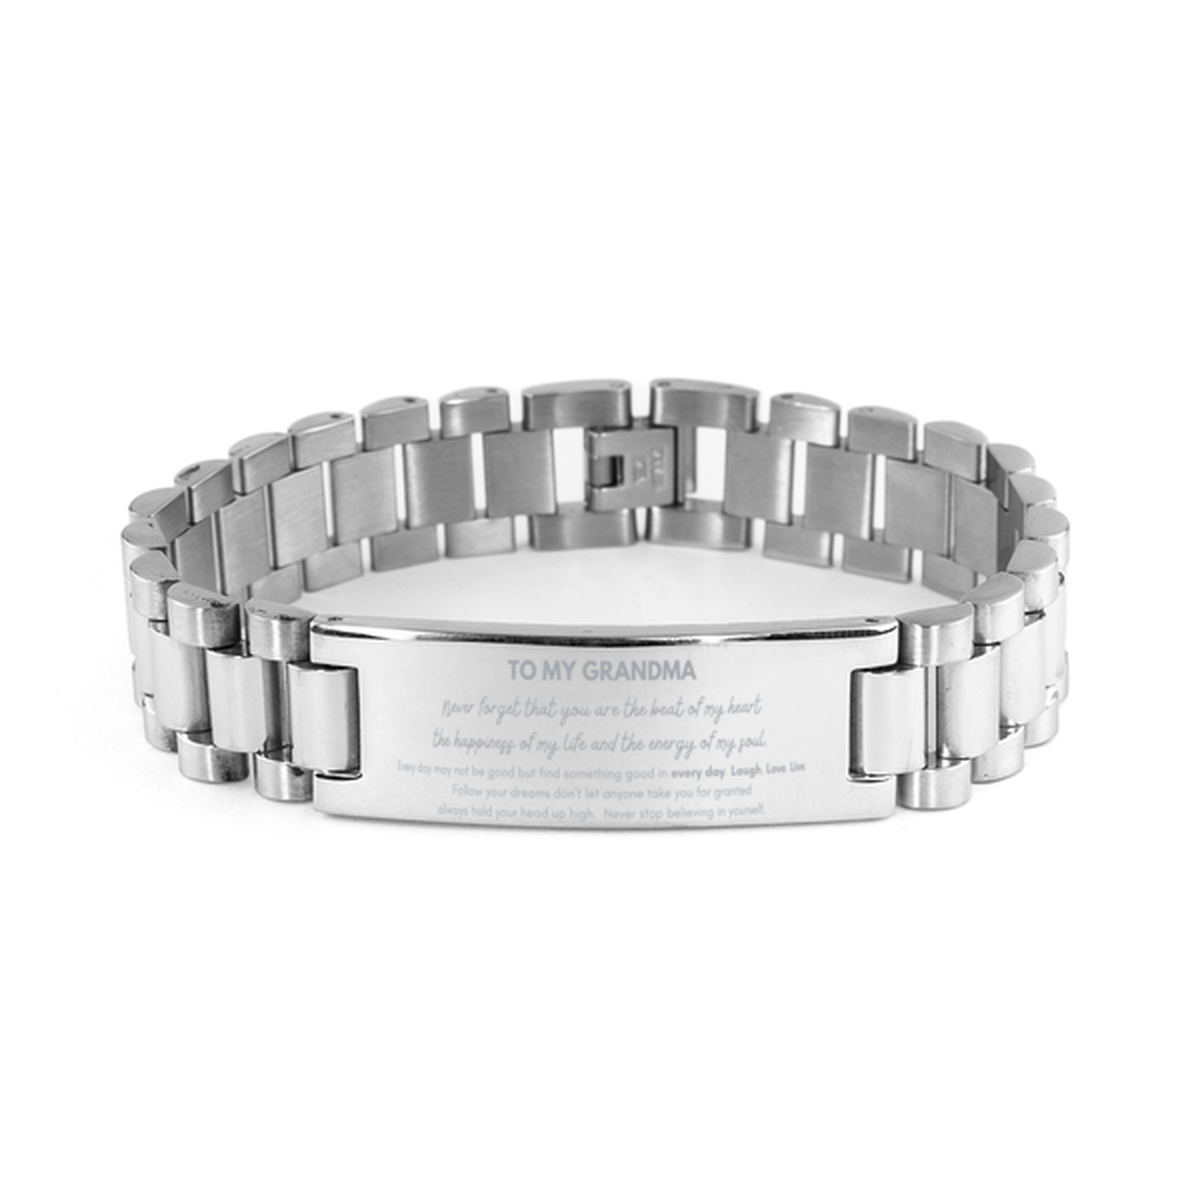 To My Grandma Bracelet Gifts, Christmas Grandma Ladder Stainless Steel Bracelet Present, Birthday Unique Motivational For Grandma, To My Grandma Never forget that you are the beat of my heart the happiness of my life and the energy of my soul